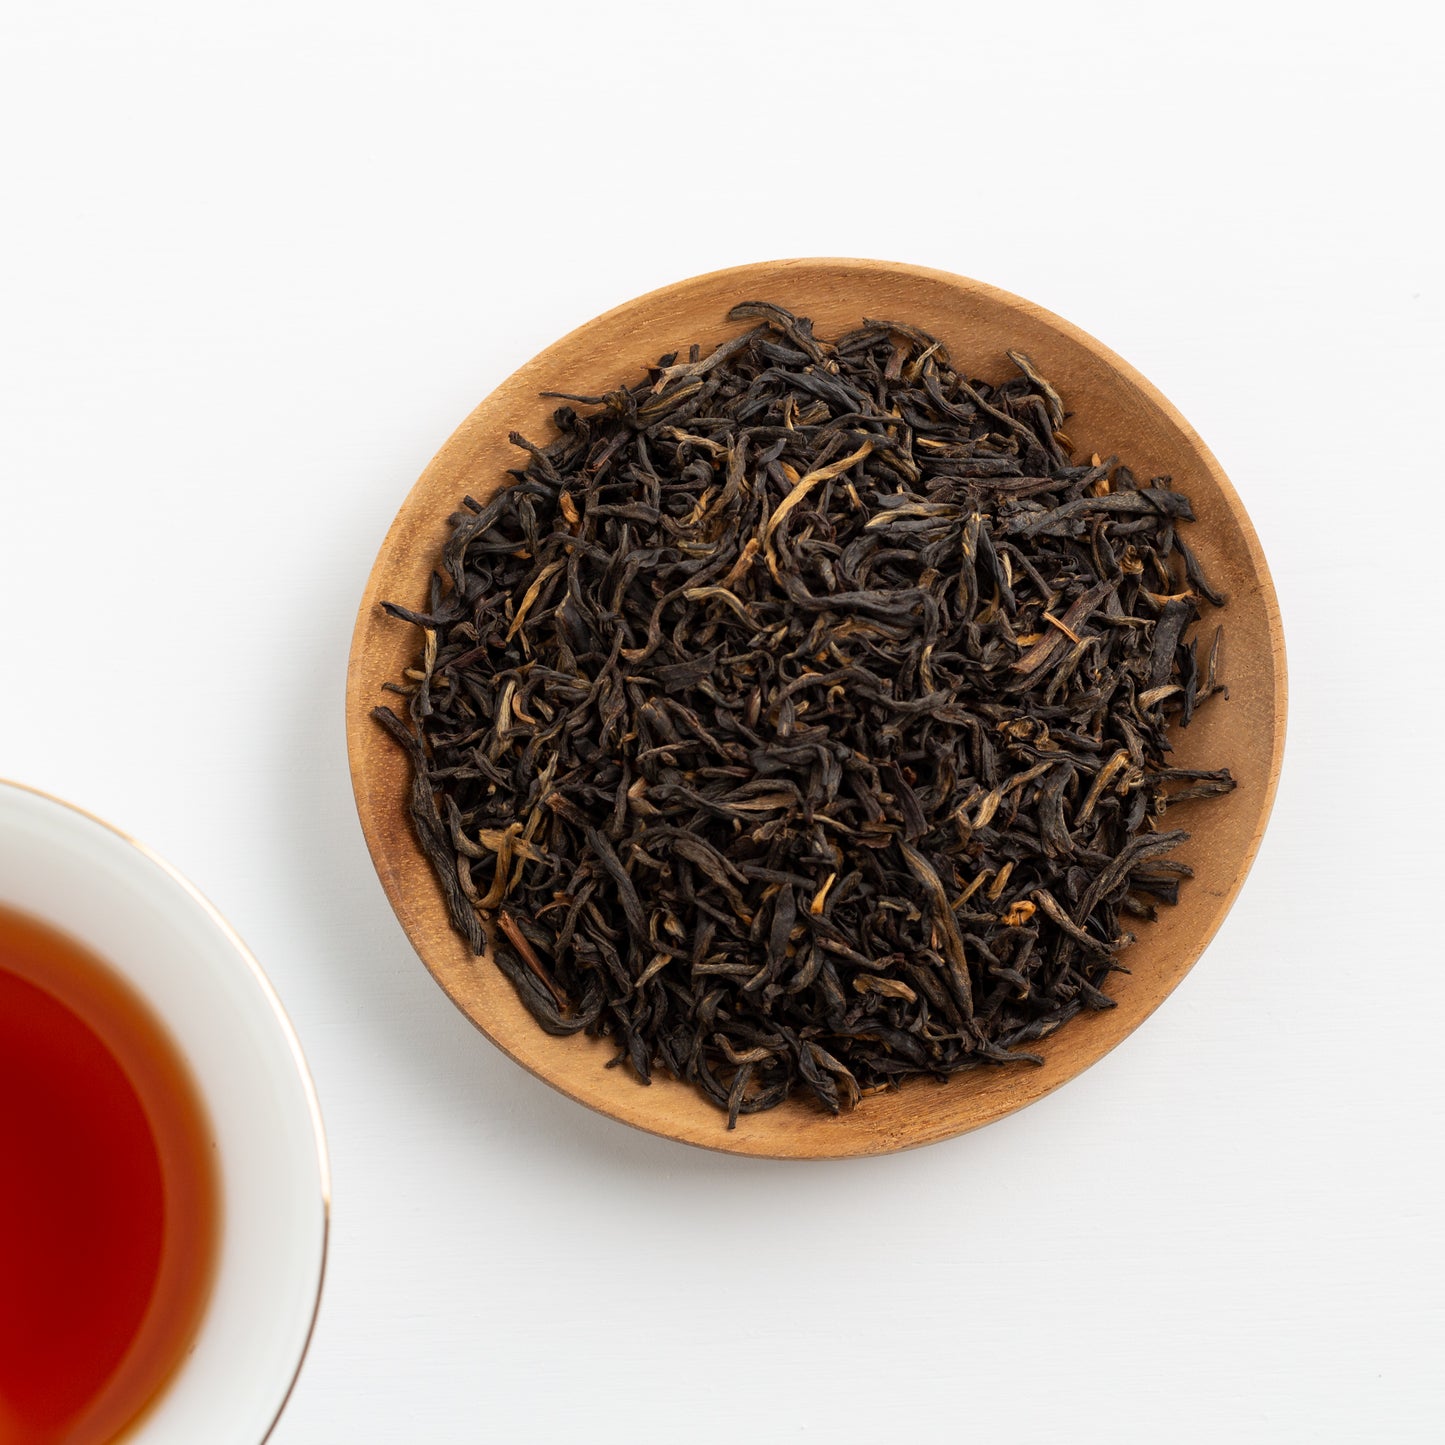 Golden Yunnan Organic Black Tea shown from above a loose tea leaves in a small wooden dish. Brewed tea in a white cup is in the lower left corner